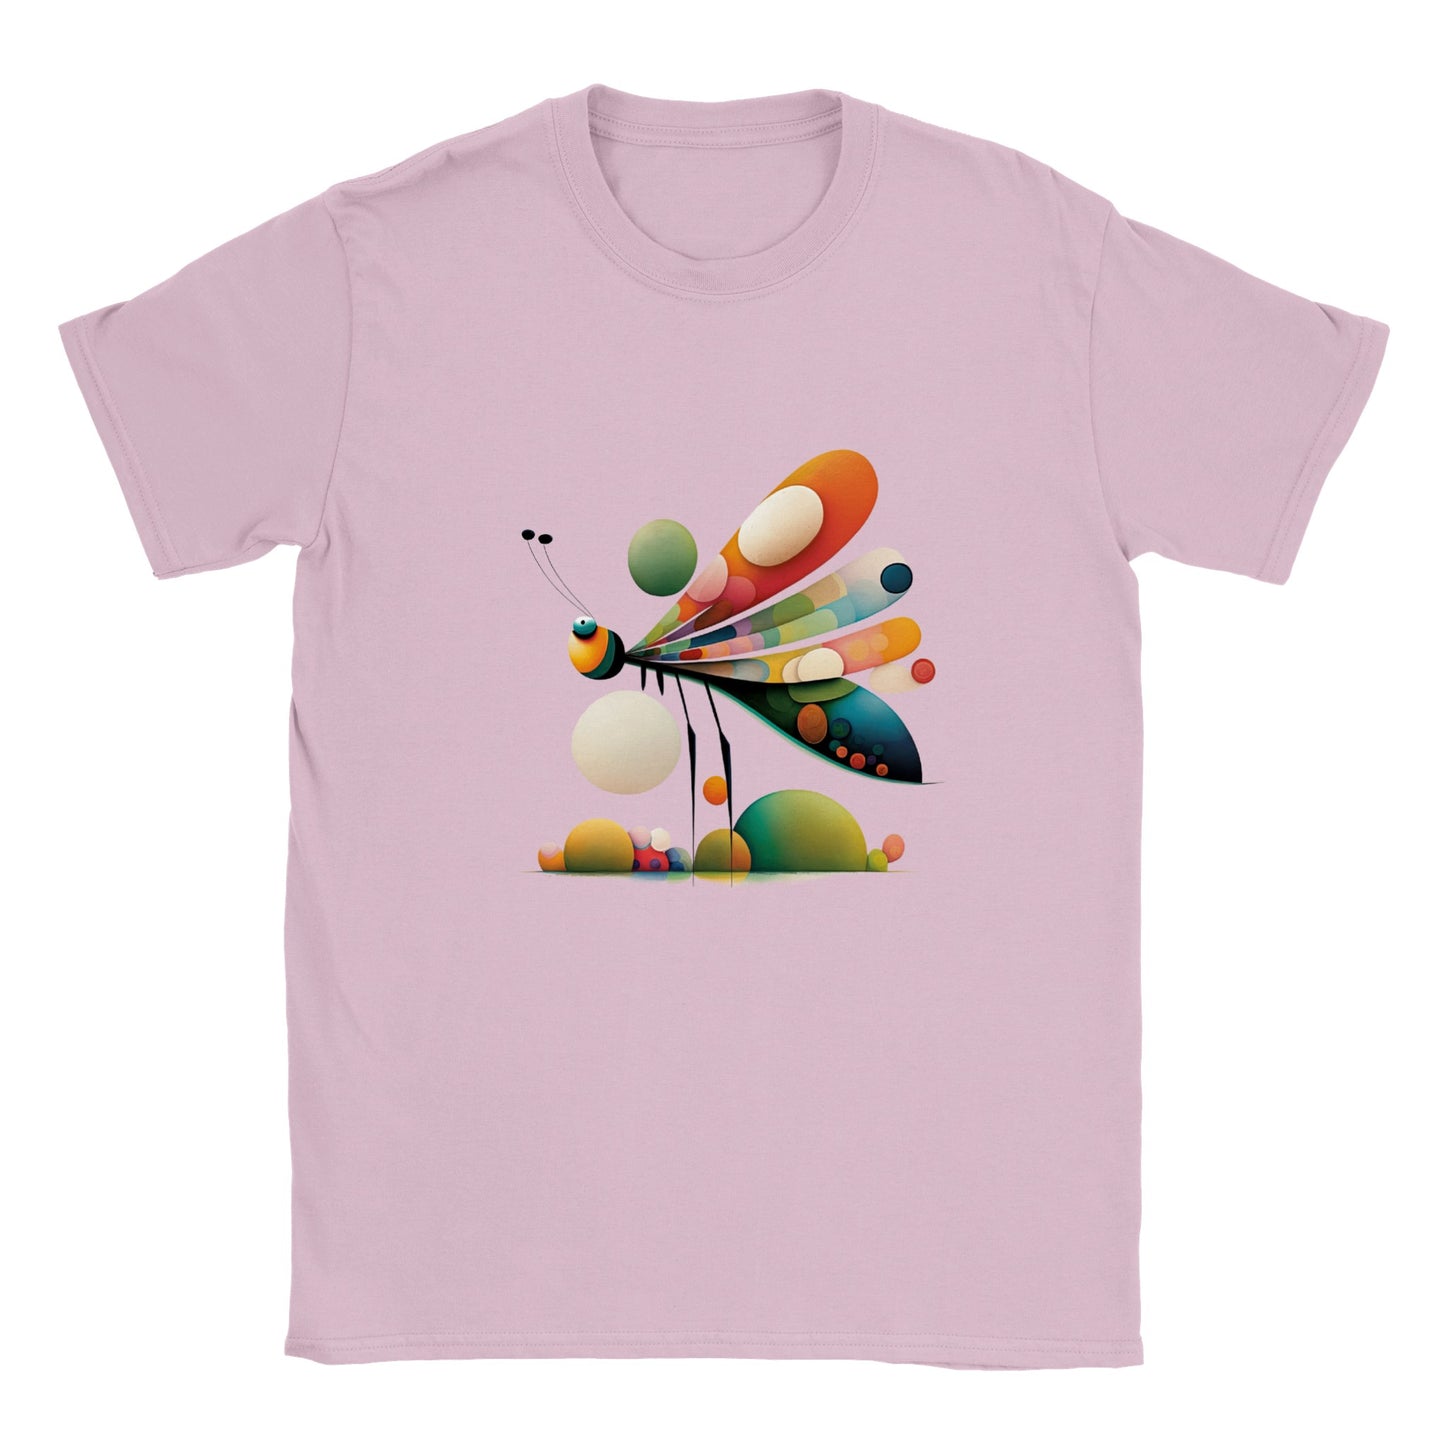 Introducing the Classic Kids Crewneck T-Shirt with Abstract Dragonfly Print - Perfect for Your Little Fashionista!